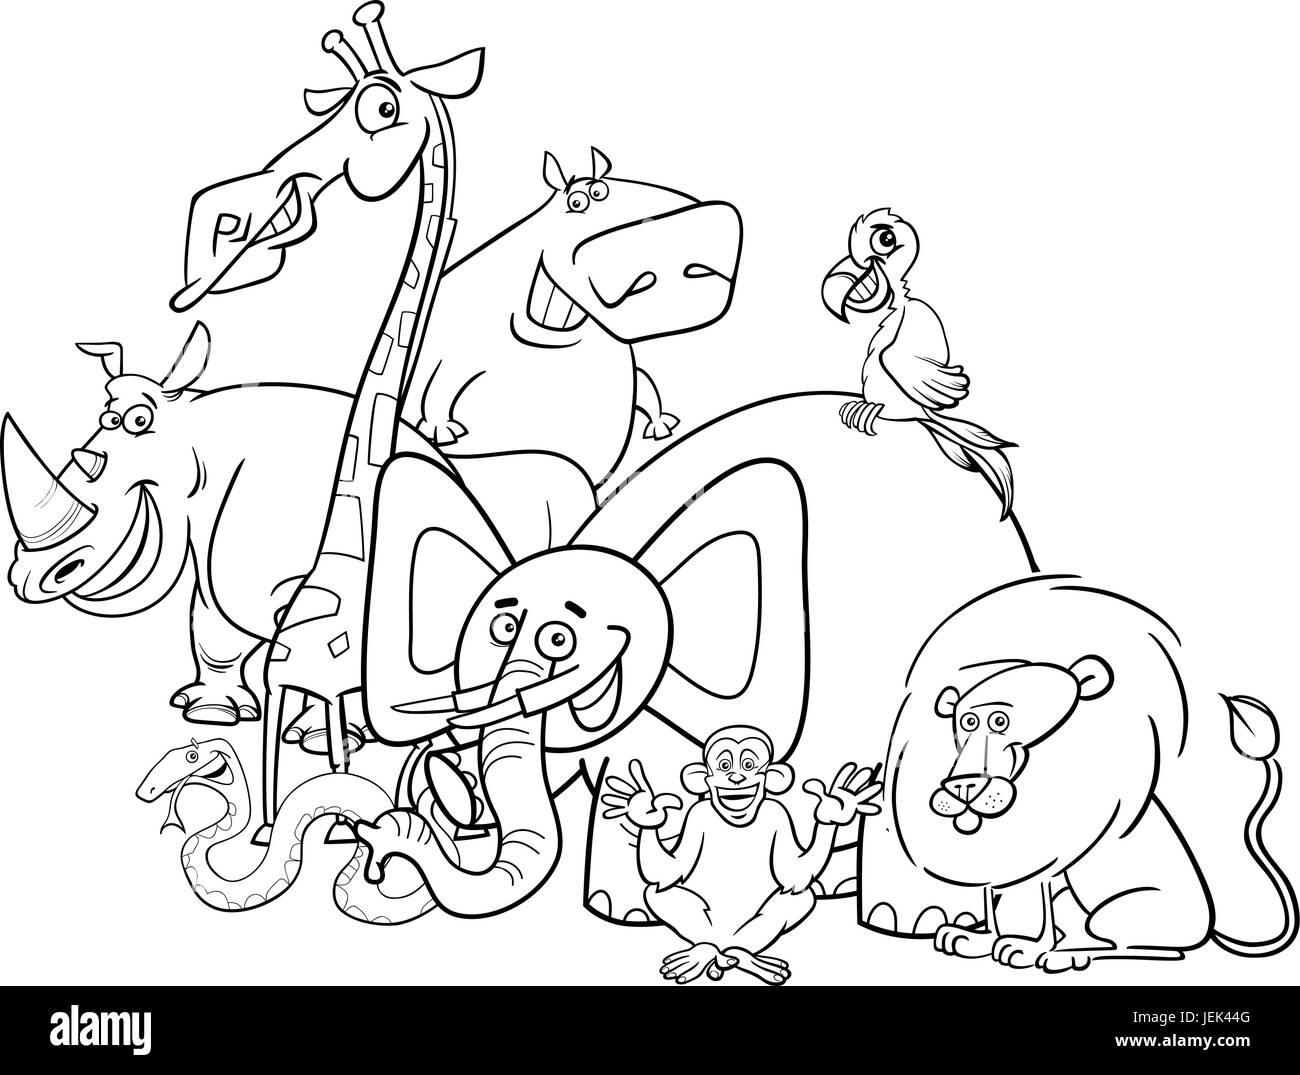 Black and White Cartoon Illustration of Safari Animal Characters Group Coloring Book Stock Vector